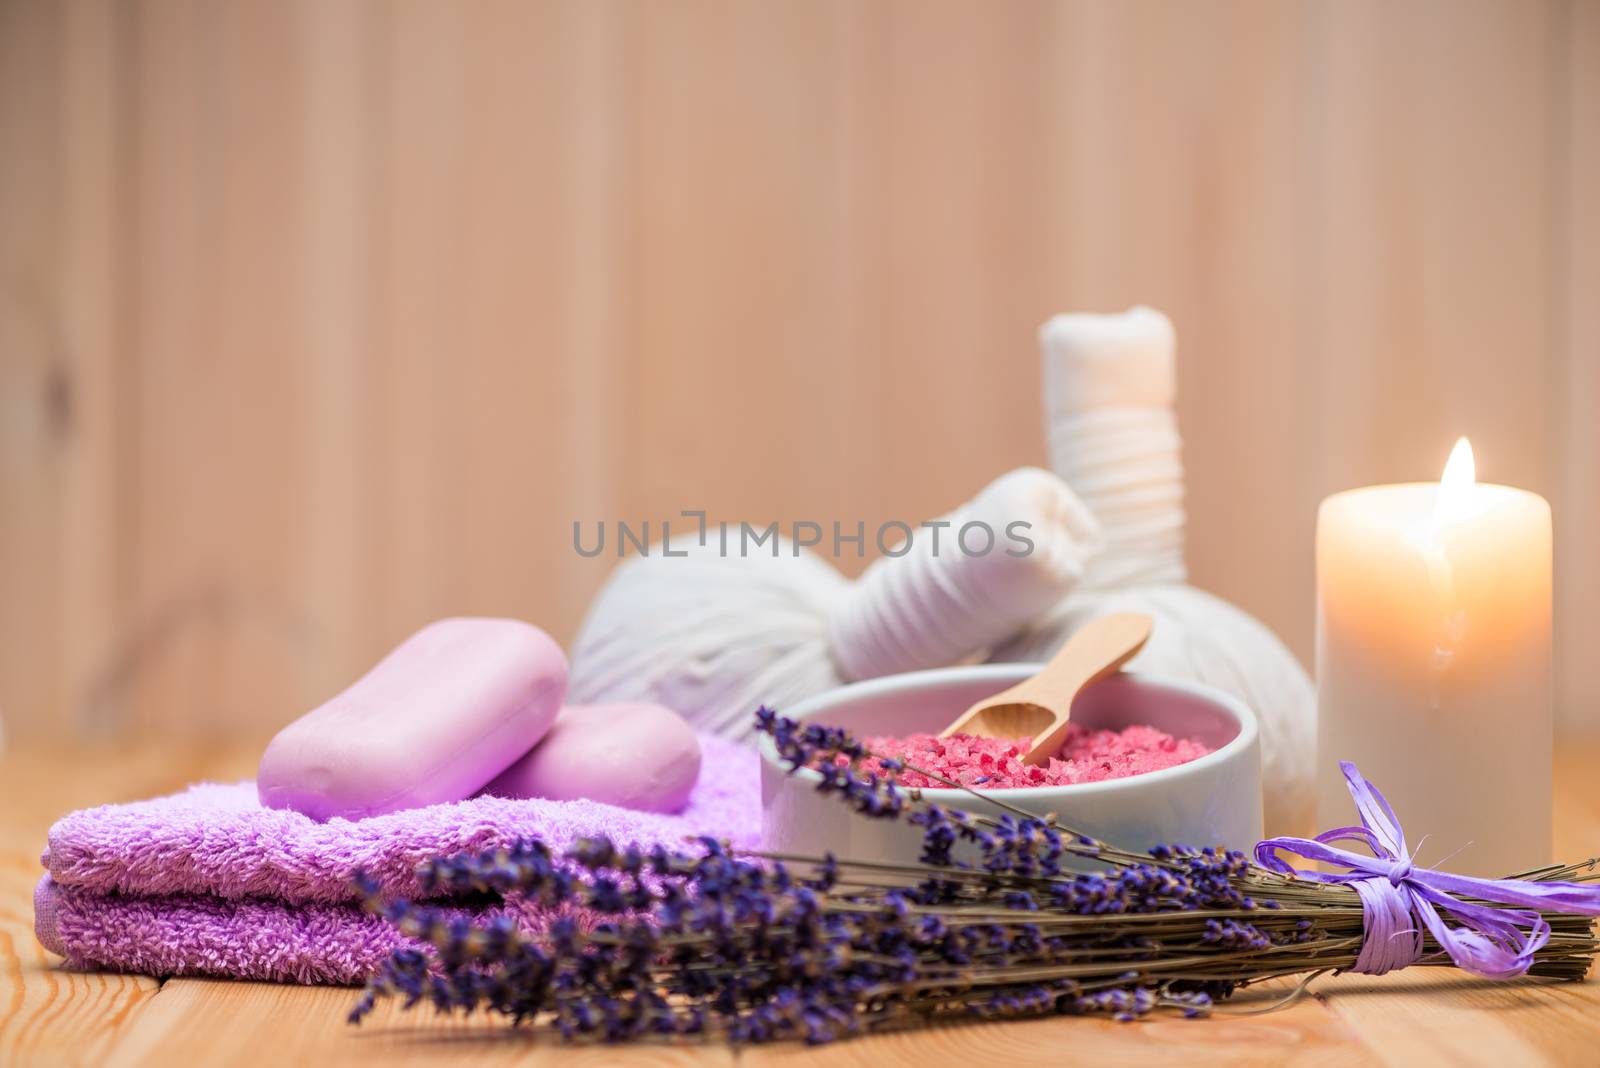 objects for massage, spa and relaxation with davand